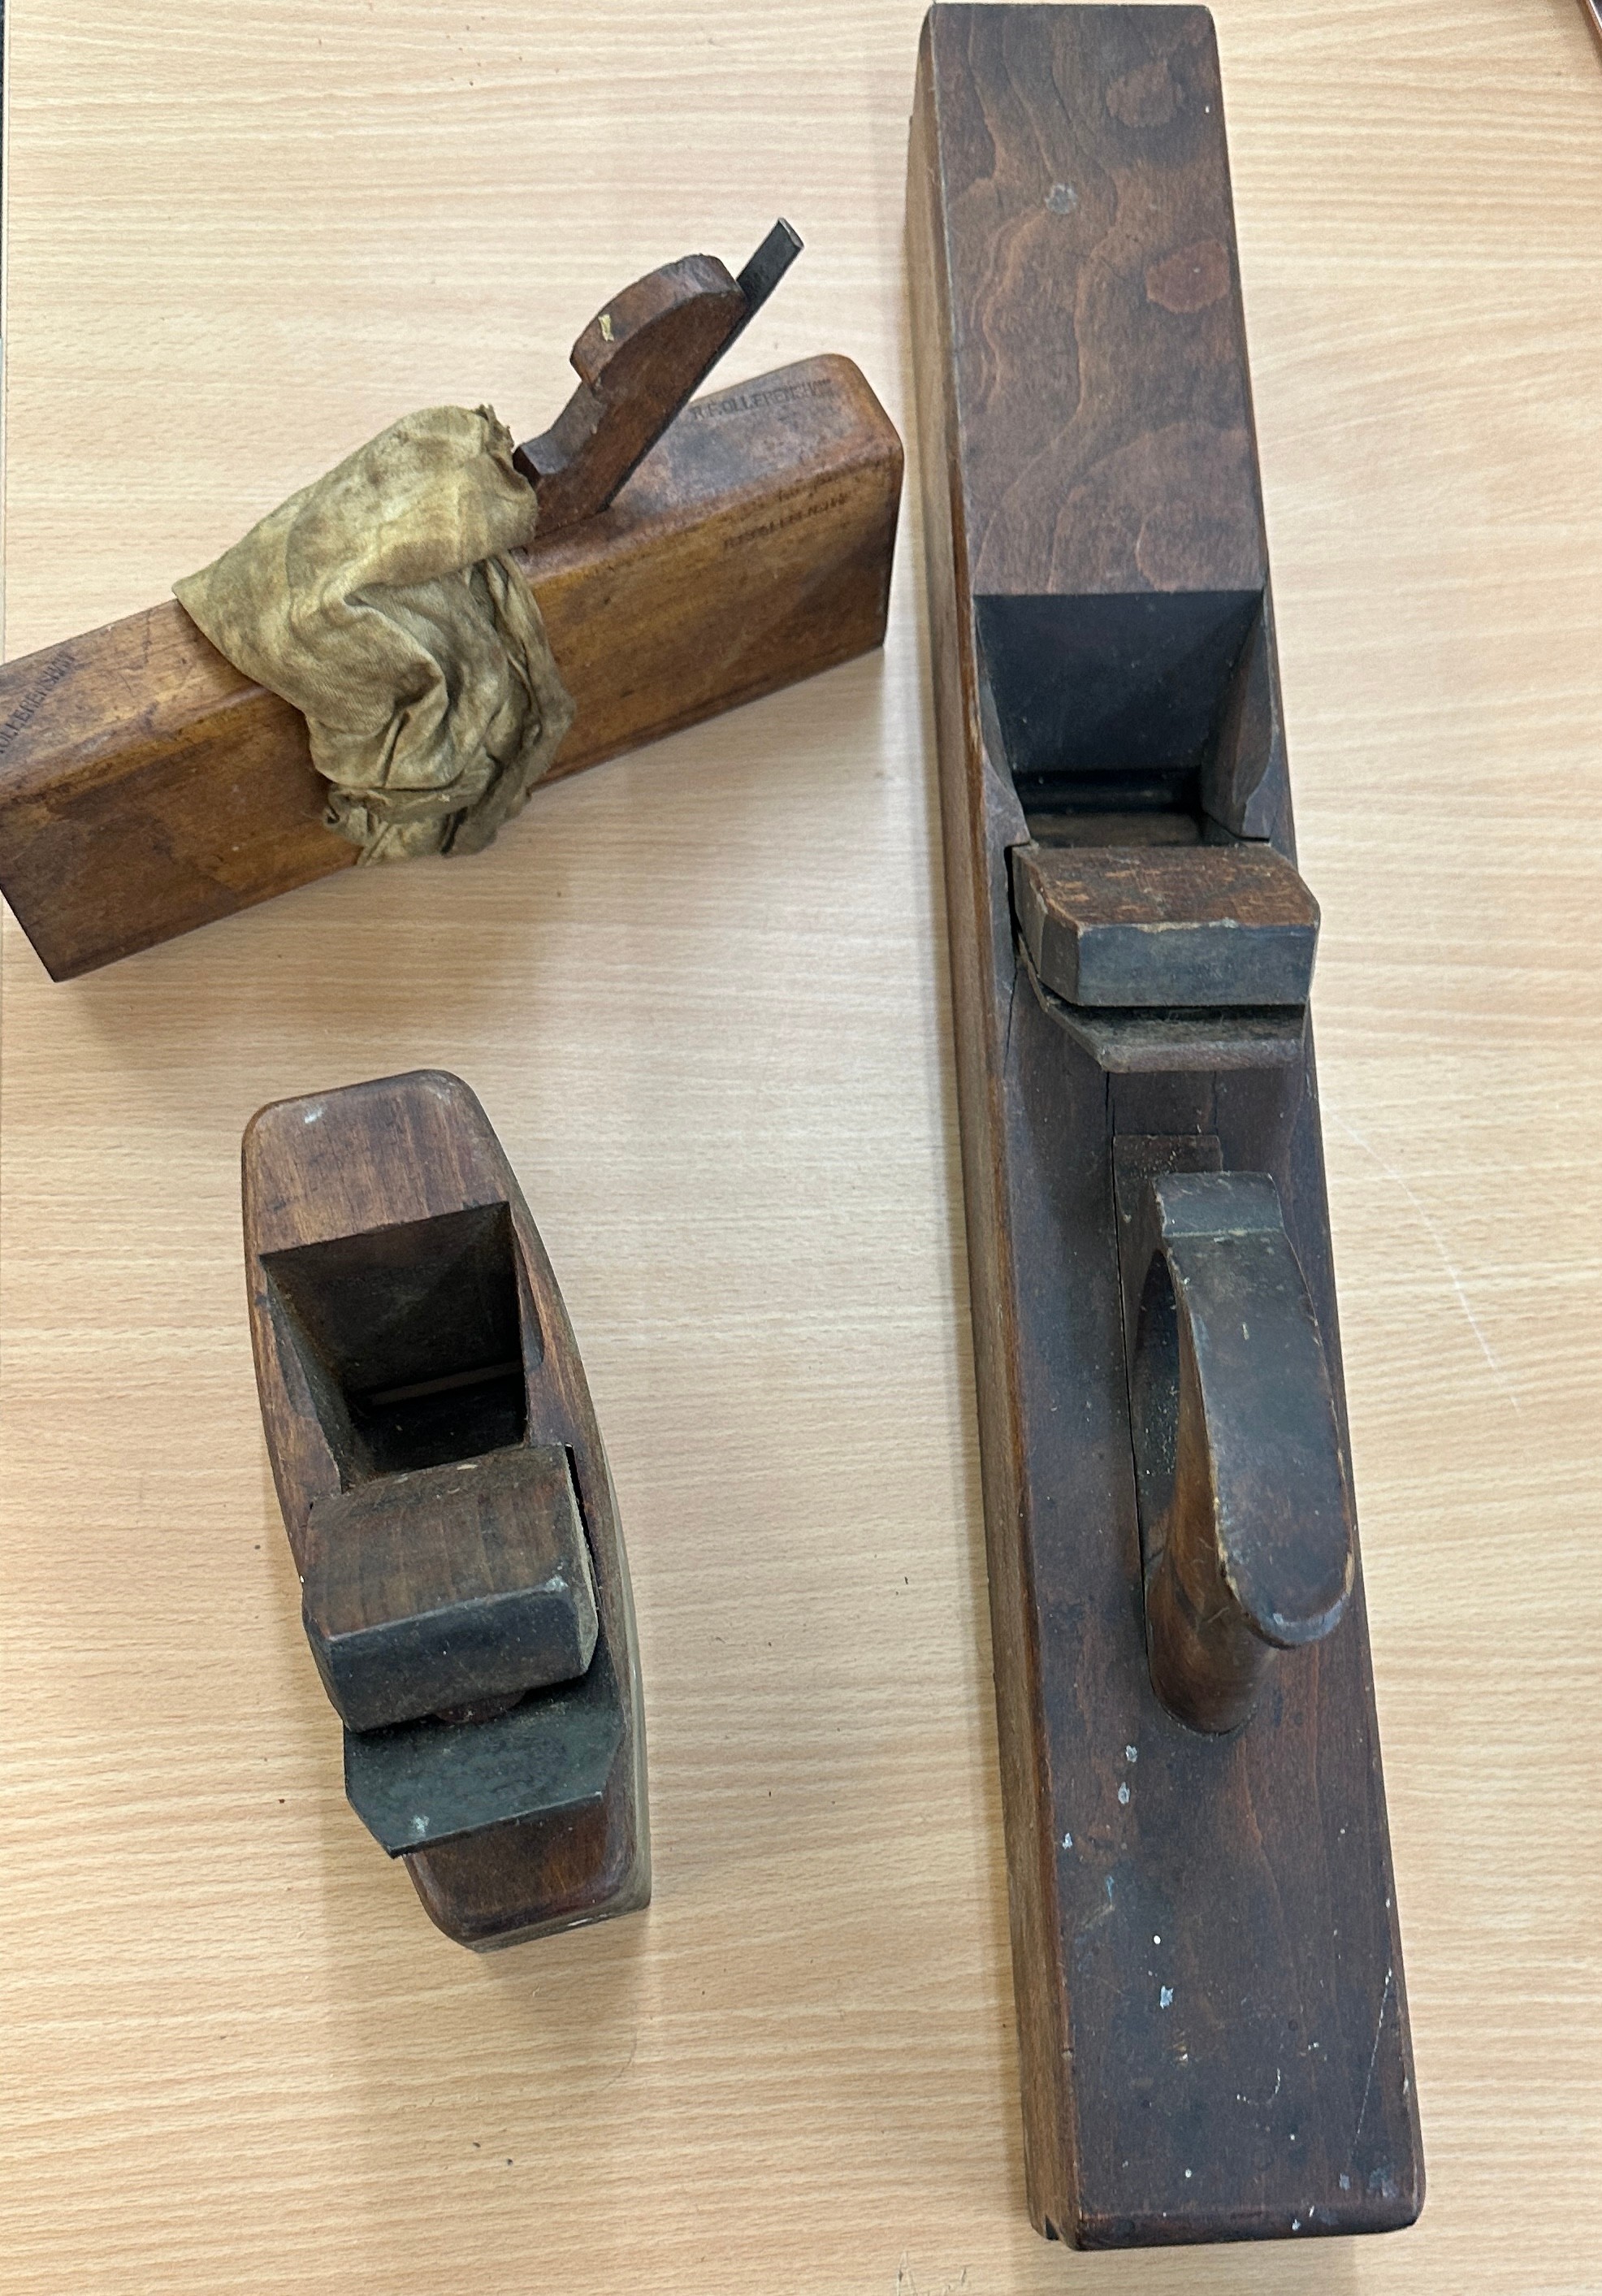 2 Vintage Royal Albion wood planes and one other